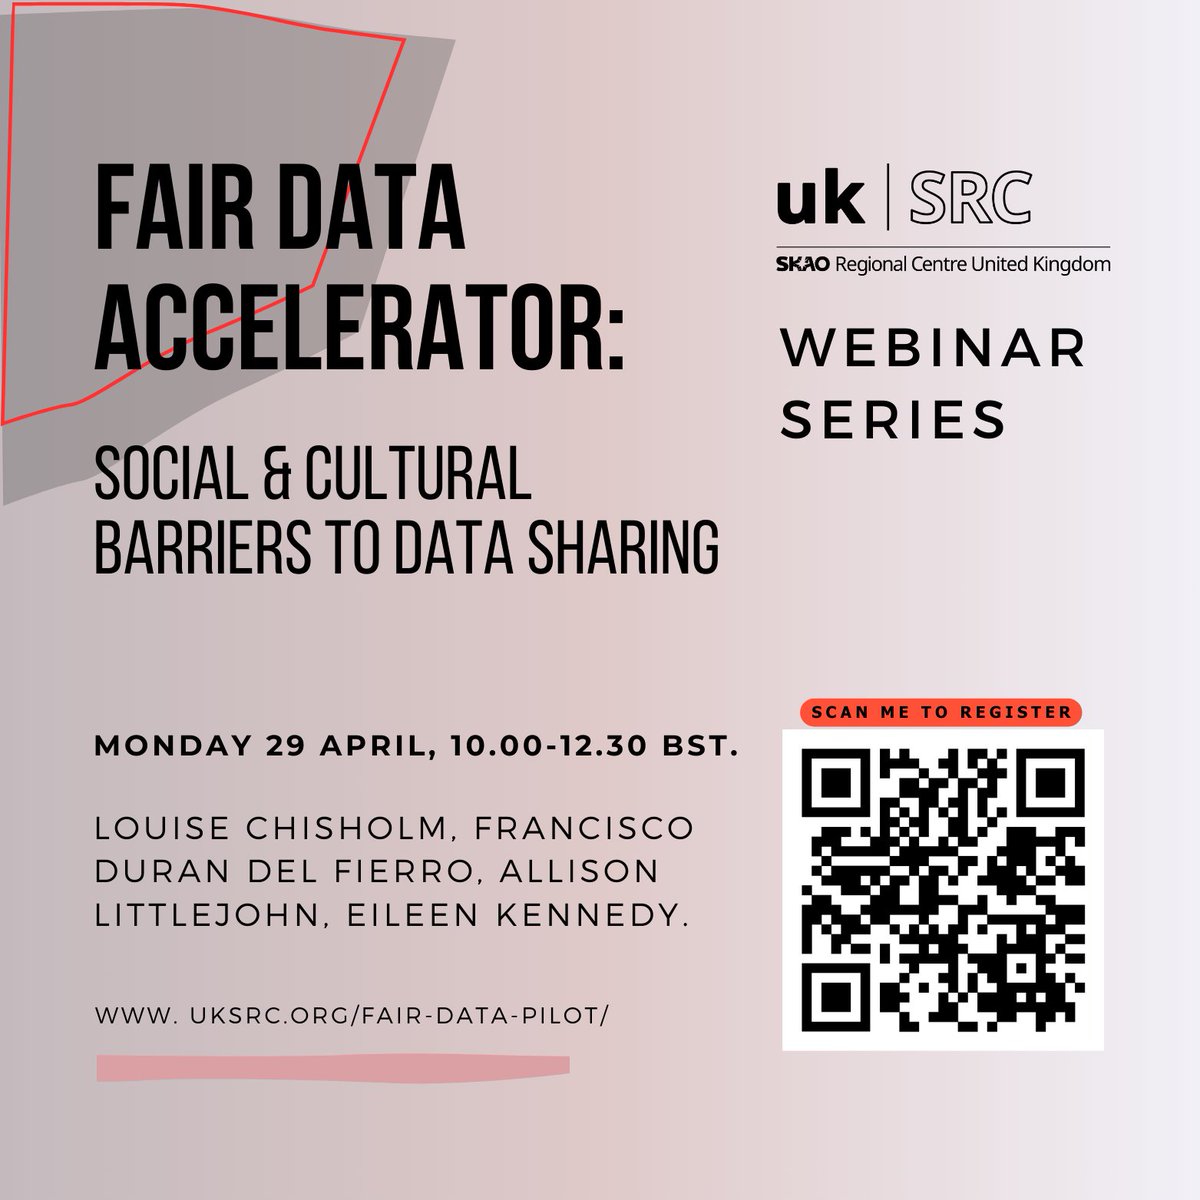 Join us at our next Webinar on April 29th, 10 am BST and find out about the social & cultural barriers that hinder research #DataSharing Registration link: ucl.zoom.us/meeting/regist… . @Lou_Chisholm @FDurandelfierro #RDM #FAIRDataAccelerator #openscience